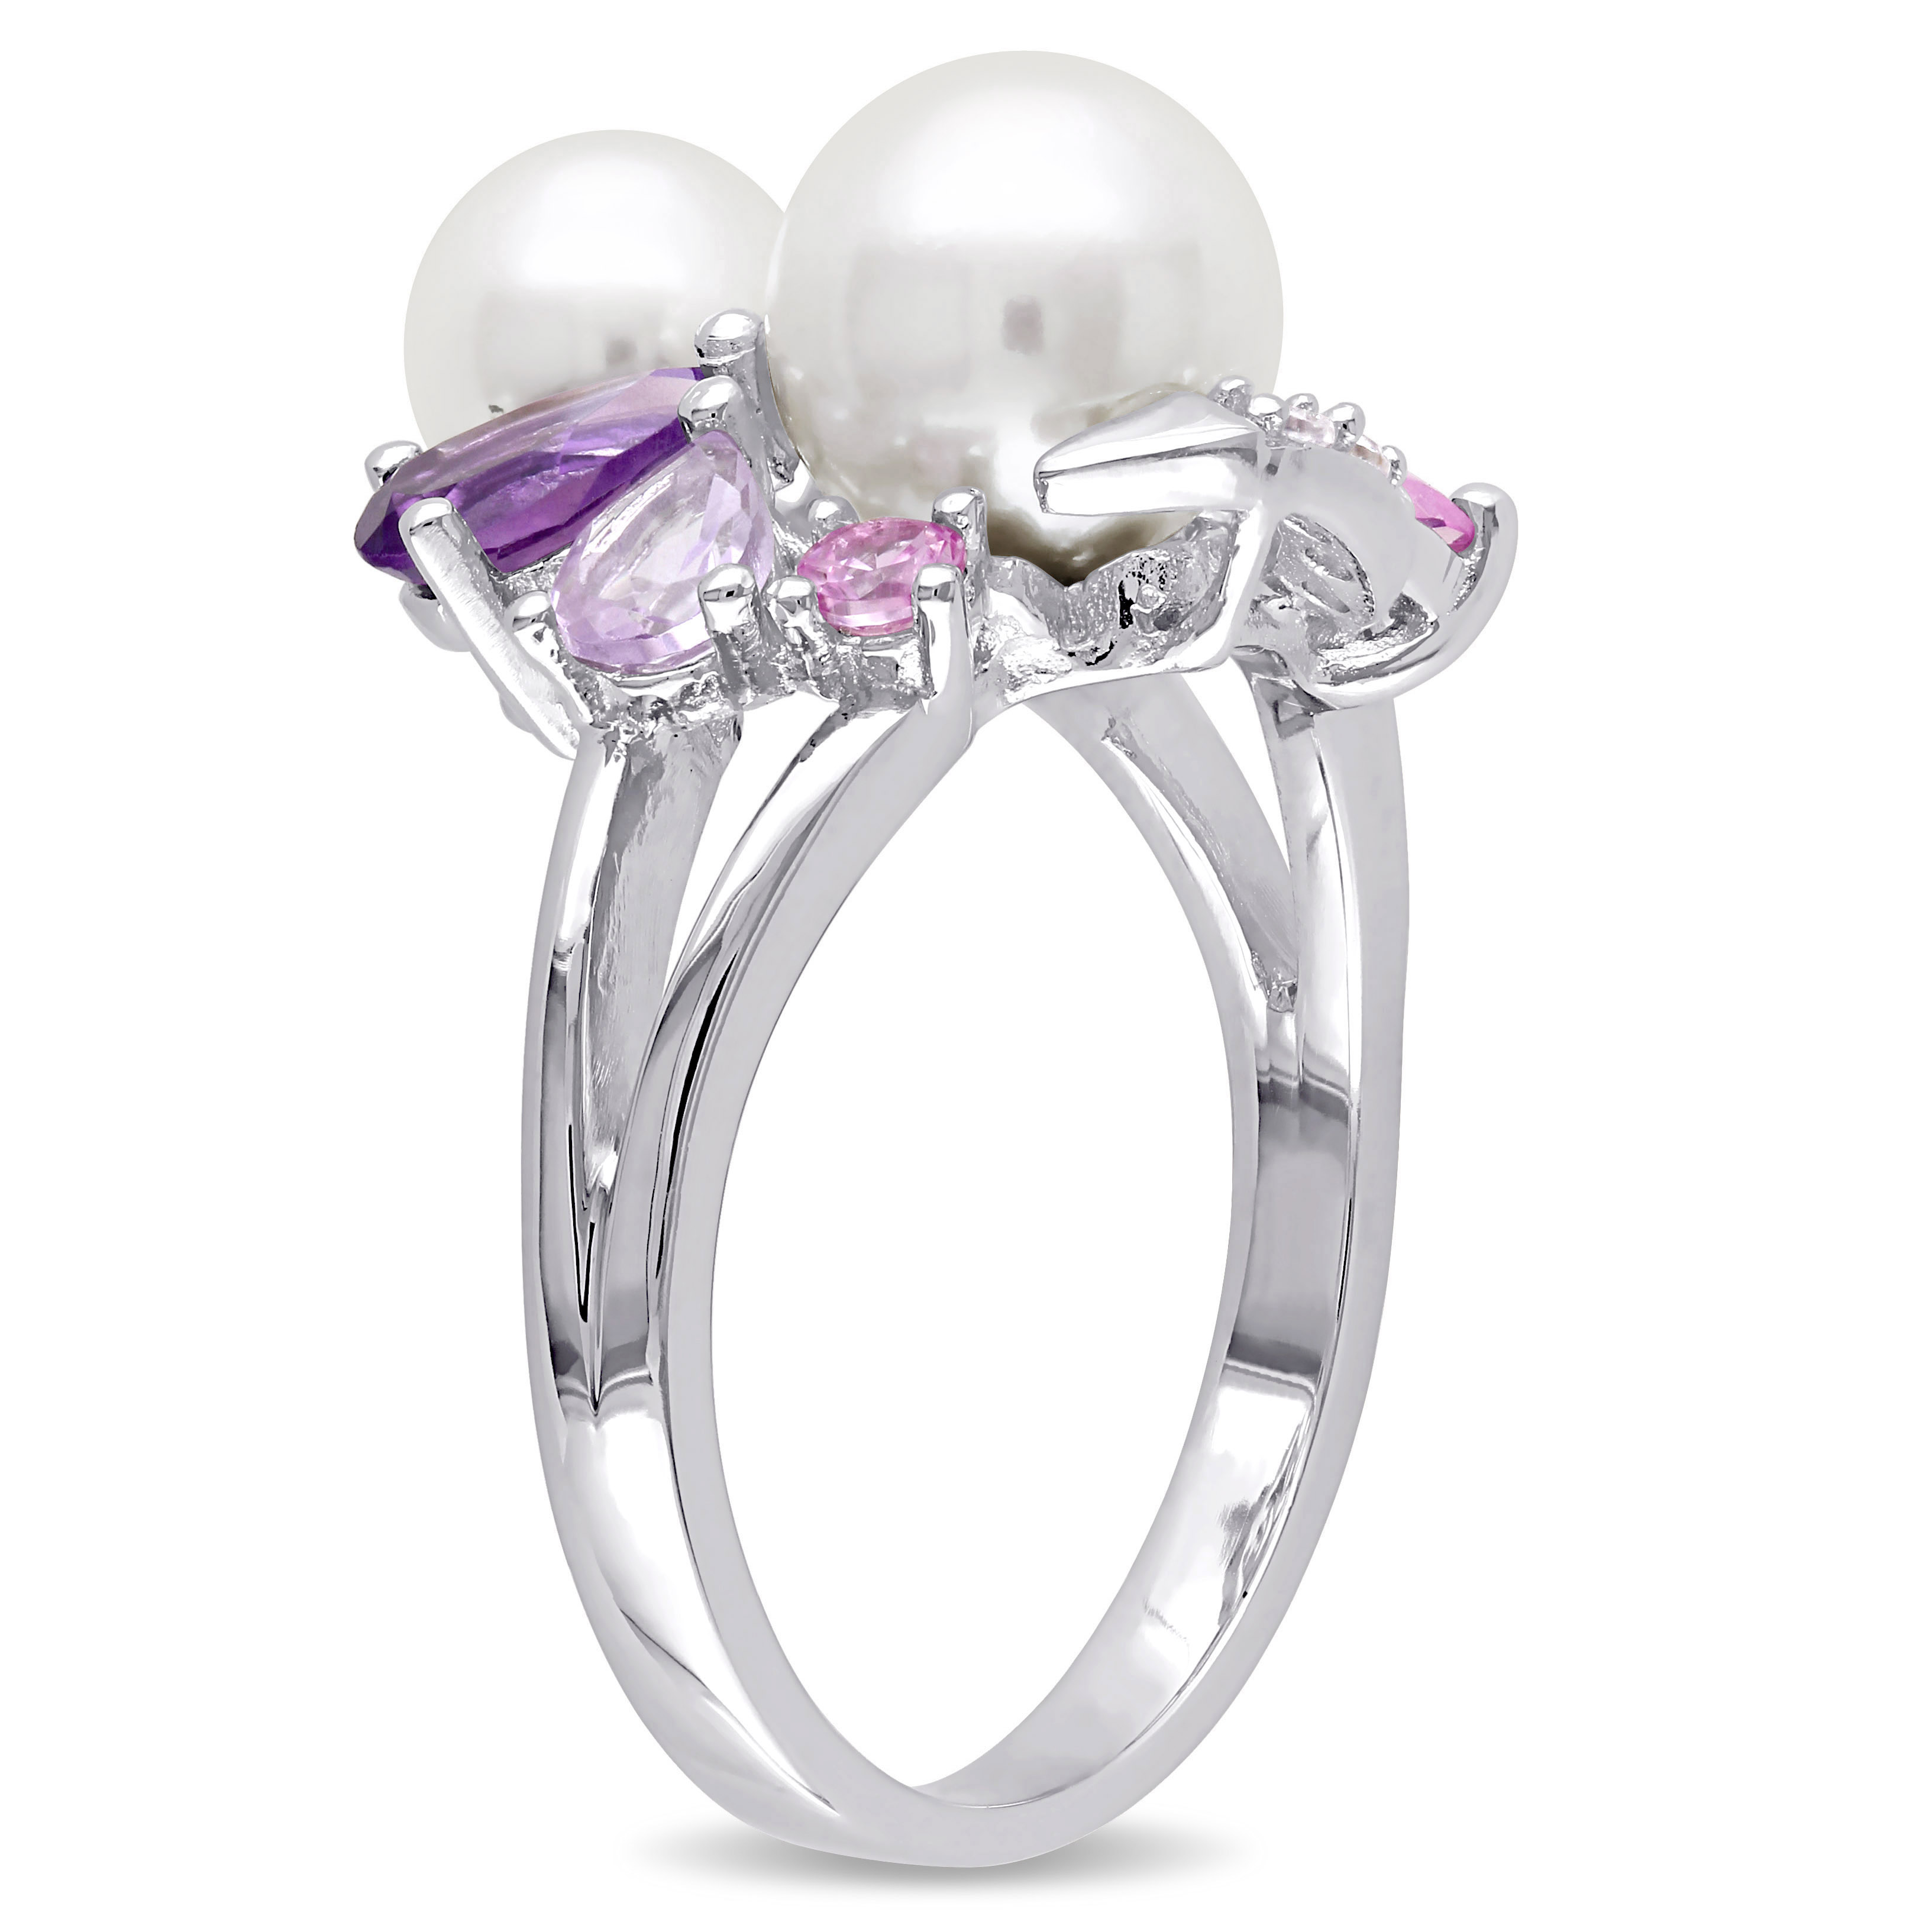 White Cultured Freshwater Pearl Ring with Amethyst, Created Pink and White Sapphire, and Rose de France in Sterling Silver